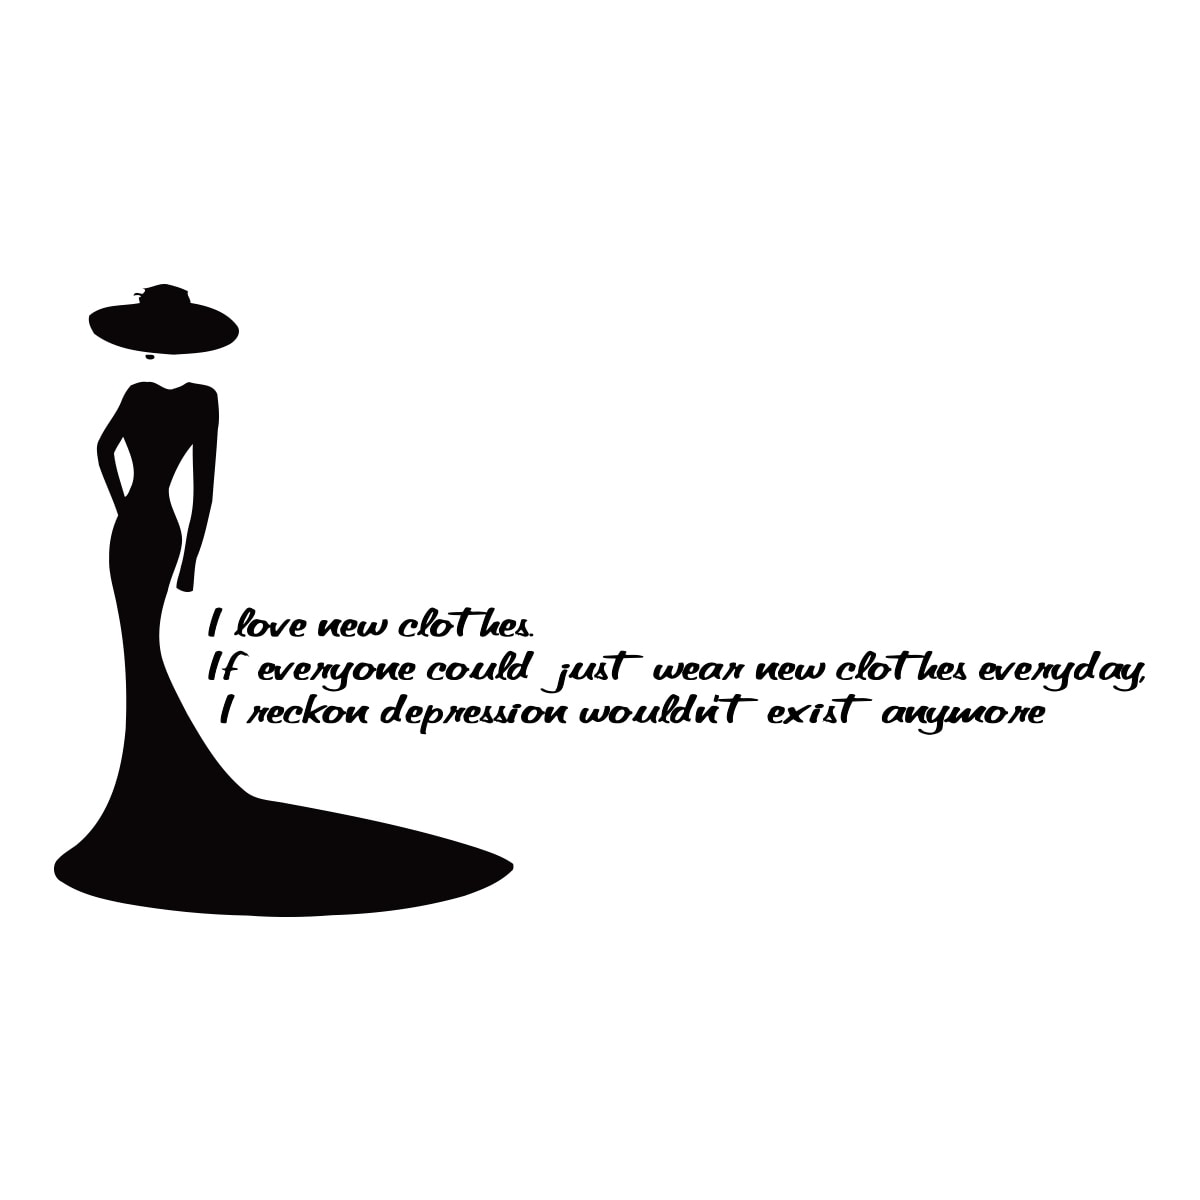 Fashion Quote I Love New Black Vinyl Wall Decal Sticker (BlackEasy to applyTheme I love new clothes, If everyone could just wear new clothes everyday, I reckon depression wouldnt exist anymore fashion quote Dimensions 22 inches wide x 35 inches long 